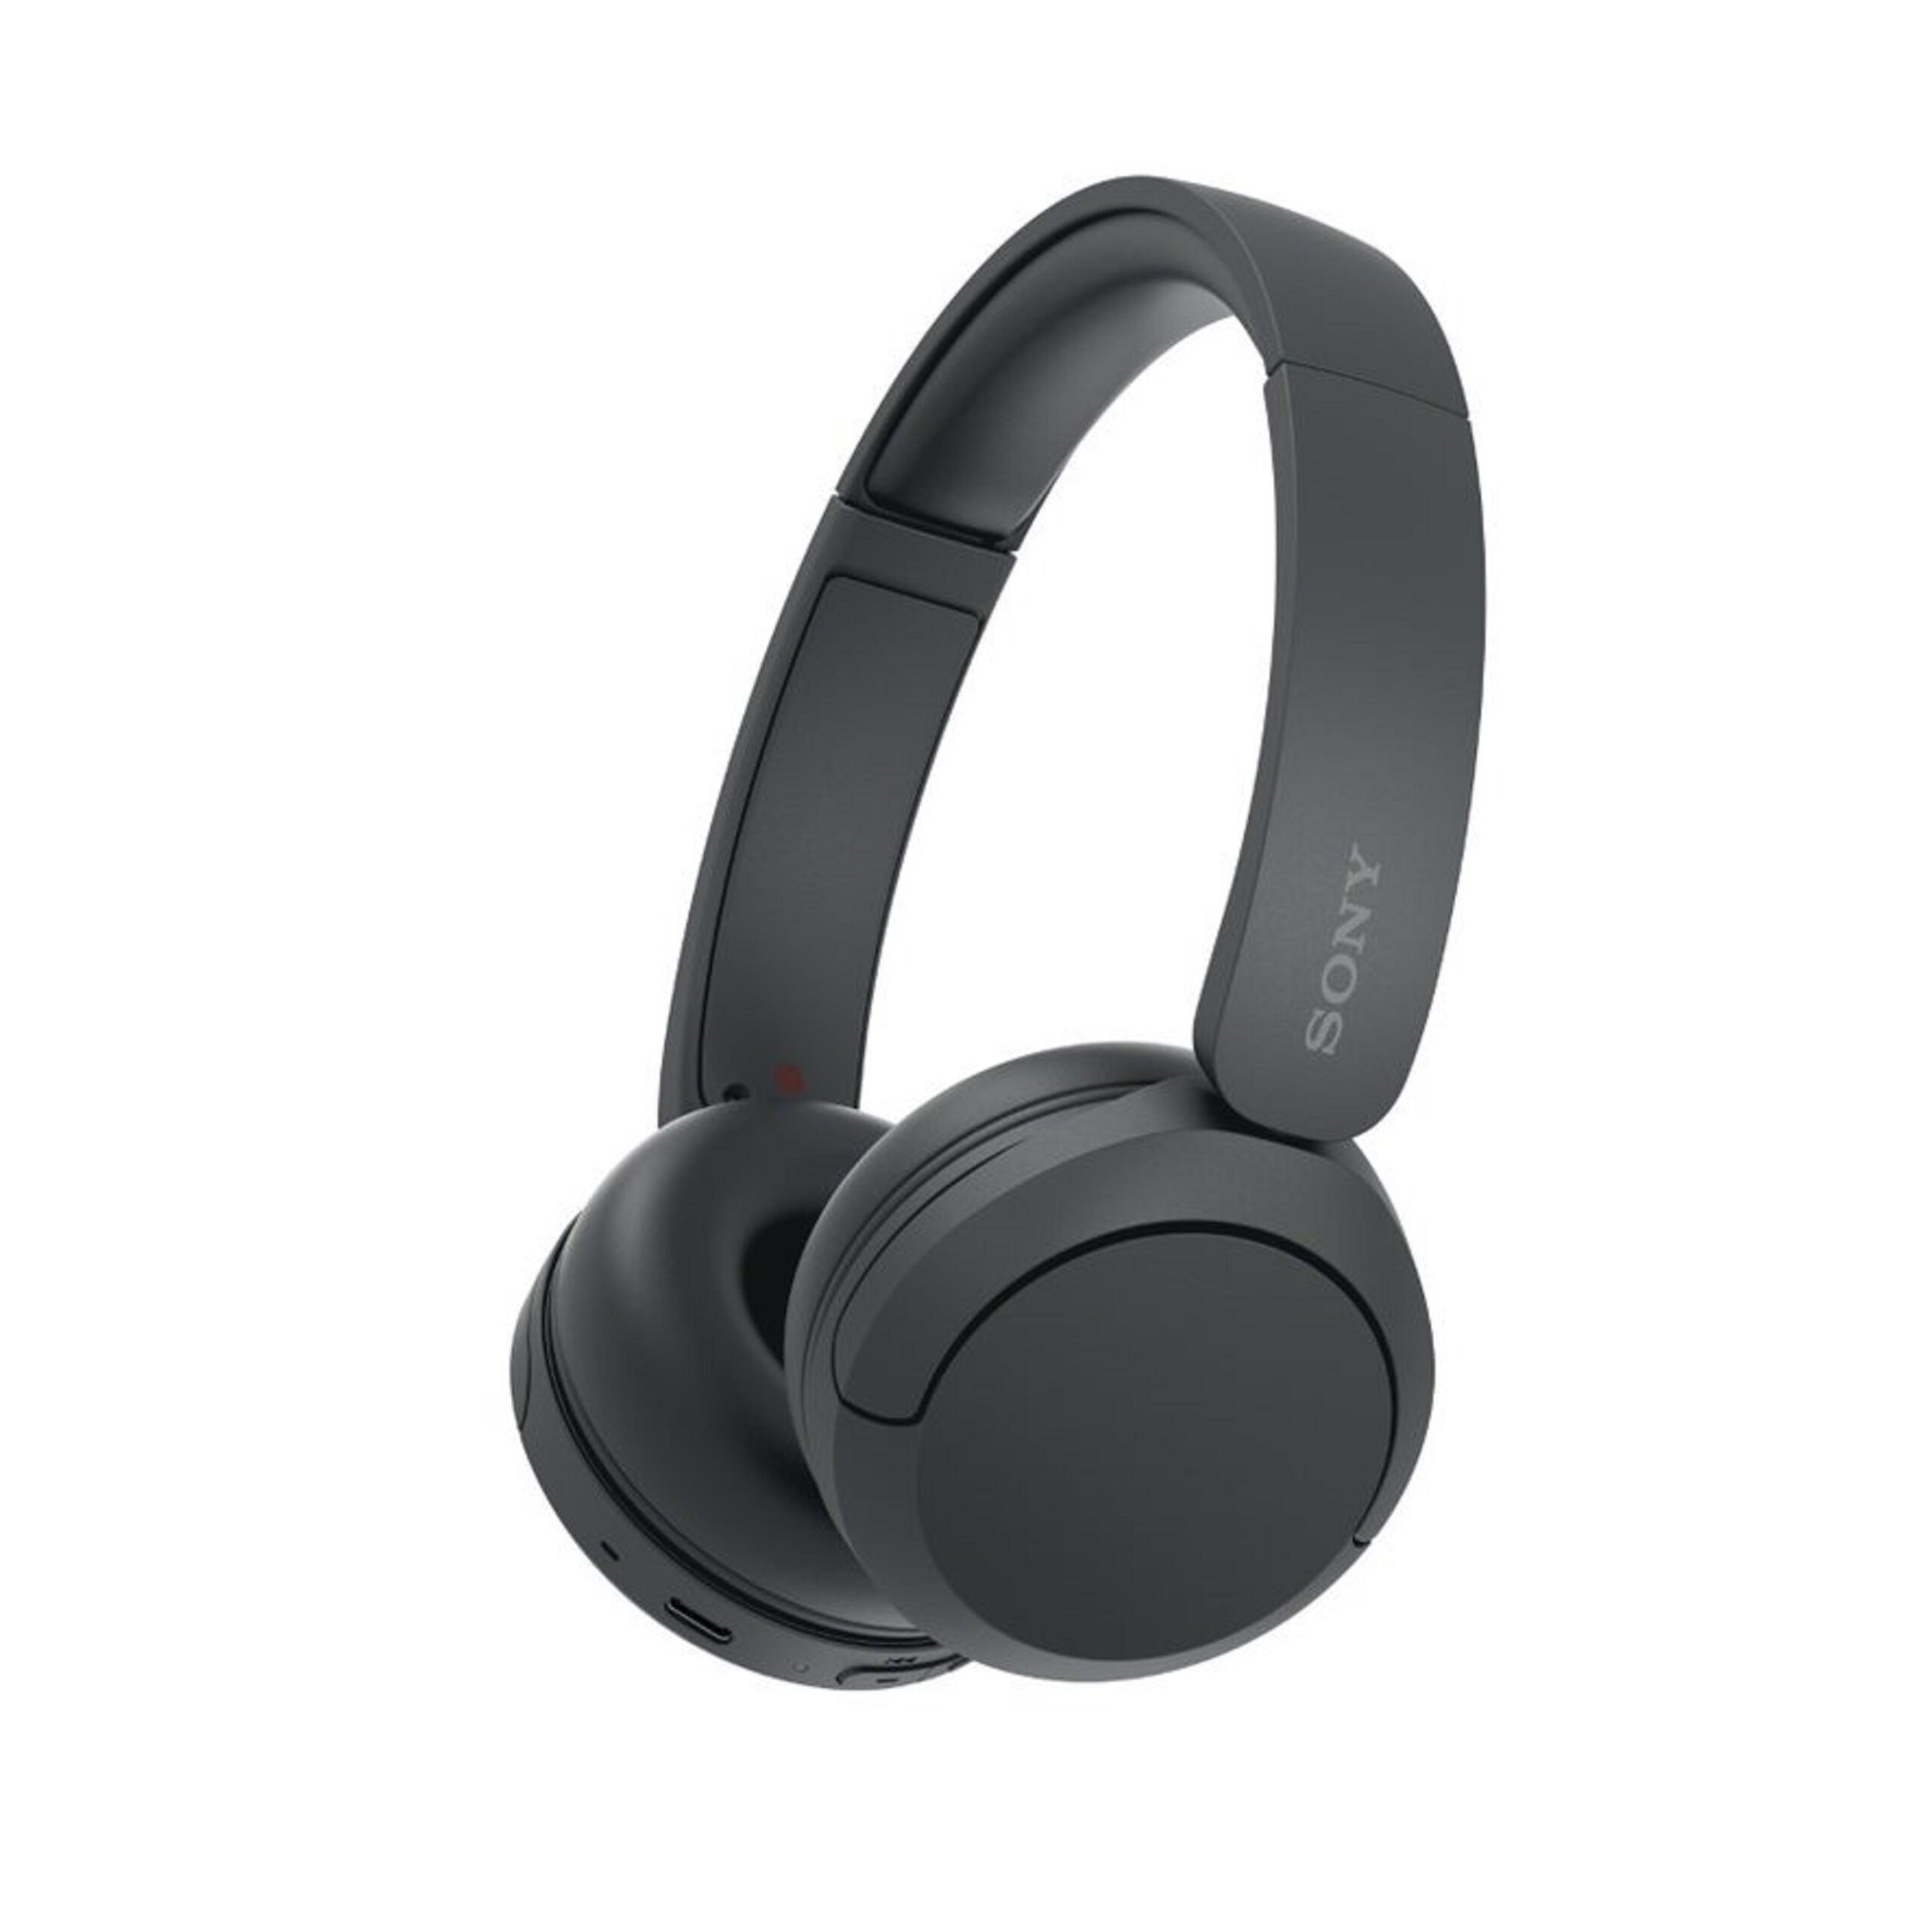 Sony Announces New Wireless Headphones WH-CH720N and WH-CH520 with Noise-Cancelling and Long Battery Life